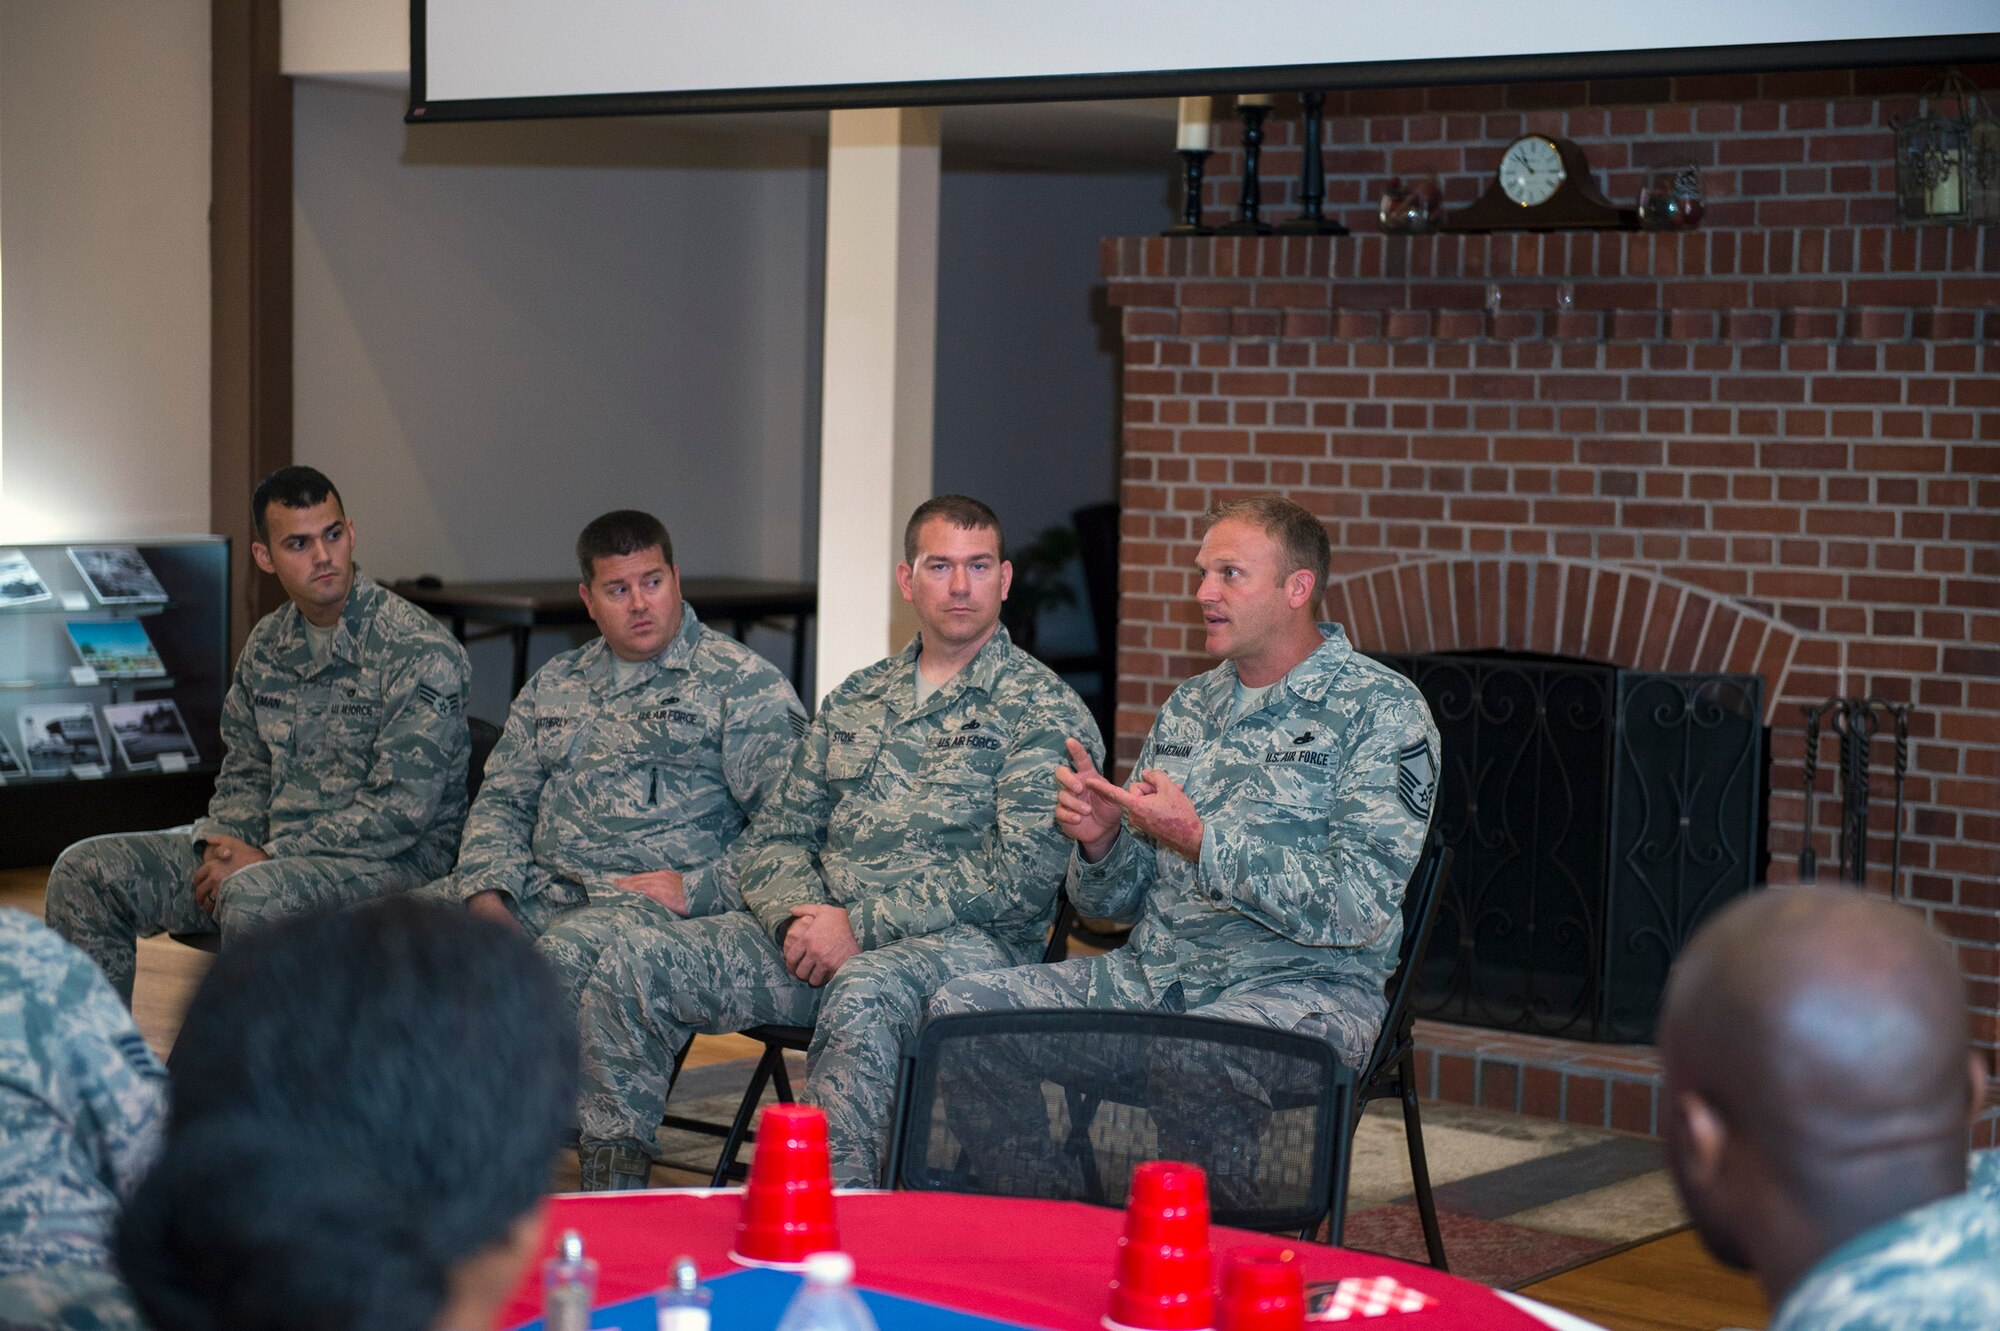 U.S. Air Force Senior Master Sgt. Jeffrey Zimmerman, 75th Aircraft Maintenance Unit superintendent, talks during a maintainer panel during the first installment of the Emerge Moody program, Oct. 6, 2016, at Moody Air Force Base, Ga. The open forum allowed participants to ask maintainers of the 23d Aircraft Maintenance Squadron the highlights and challenges of their career field. (U.S. Air Force photo by Airman 1st Class Greg Nash)